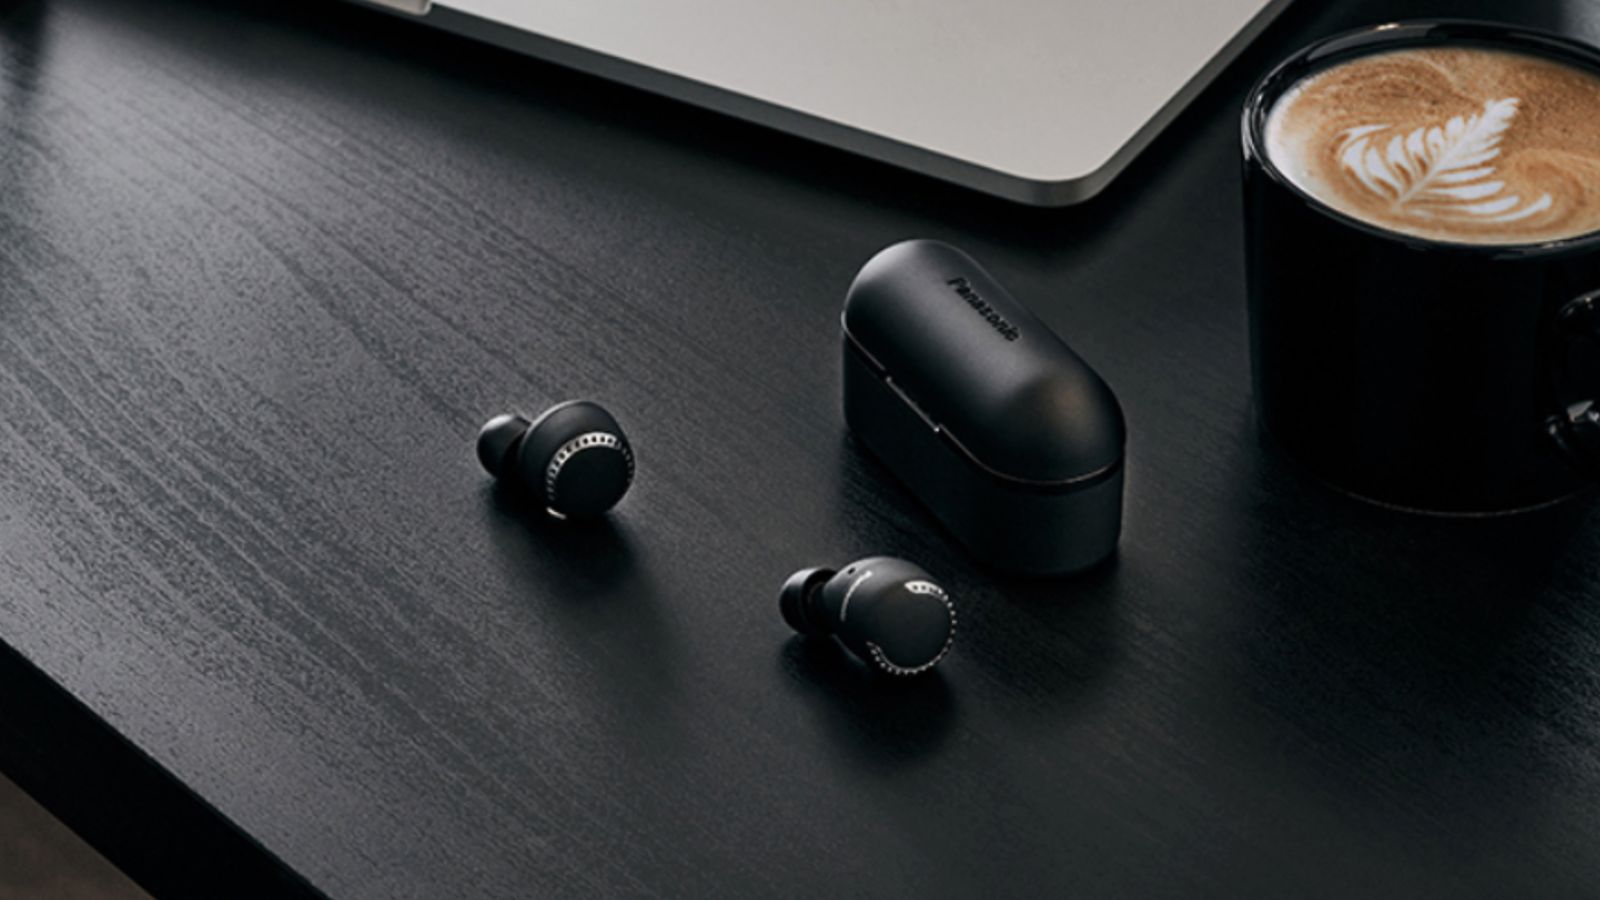 Best Android earbuds - Image of two wireless Panasonic earbuds on a desk next to a wireless charging case.